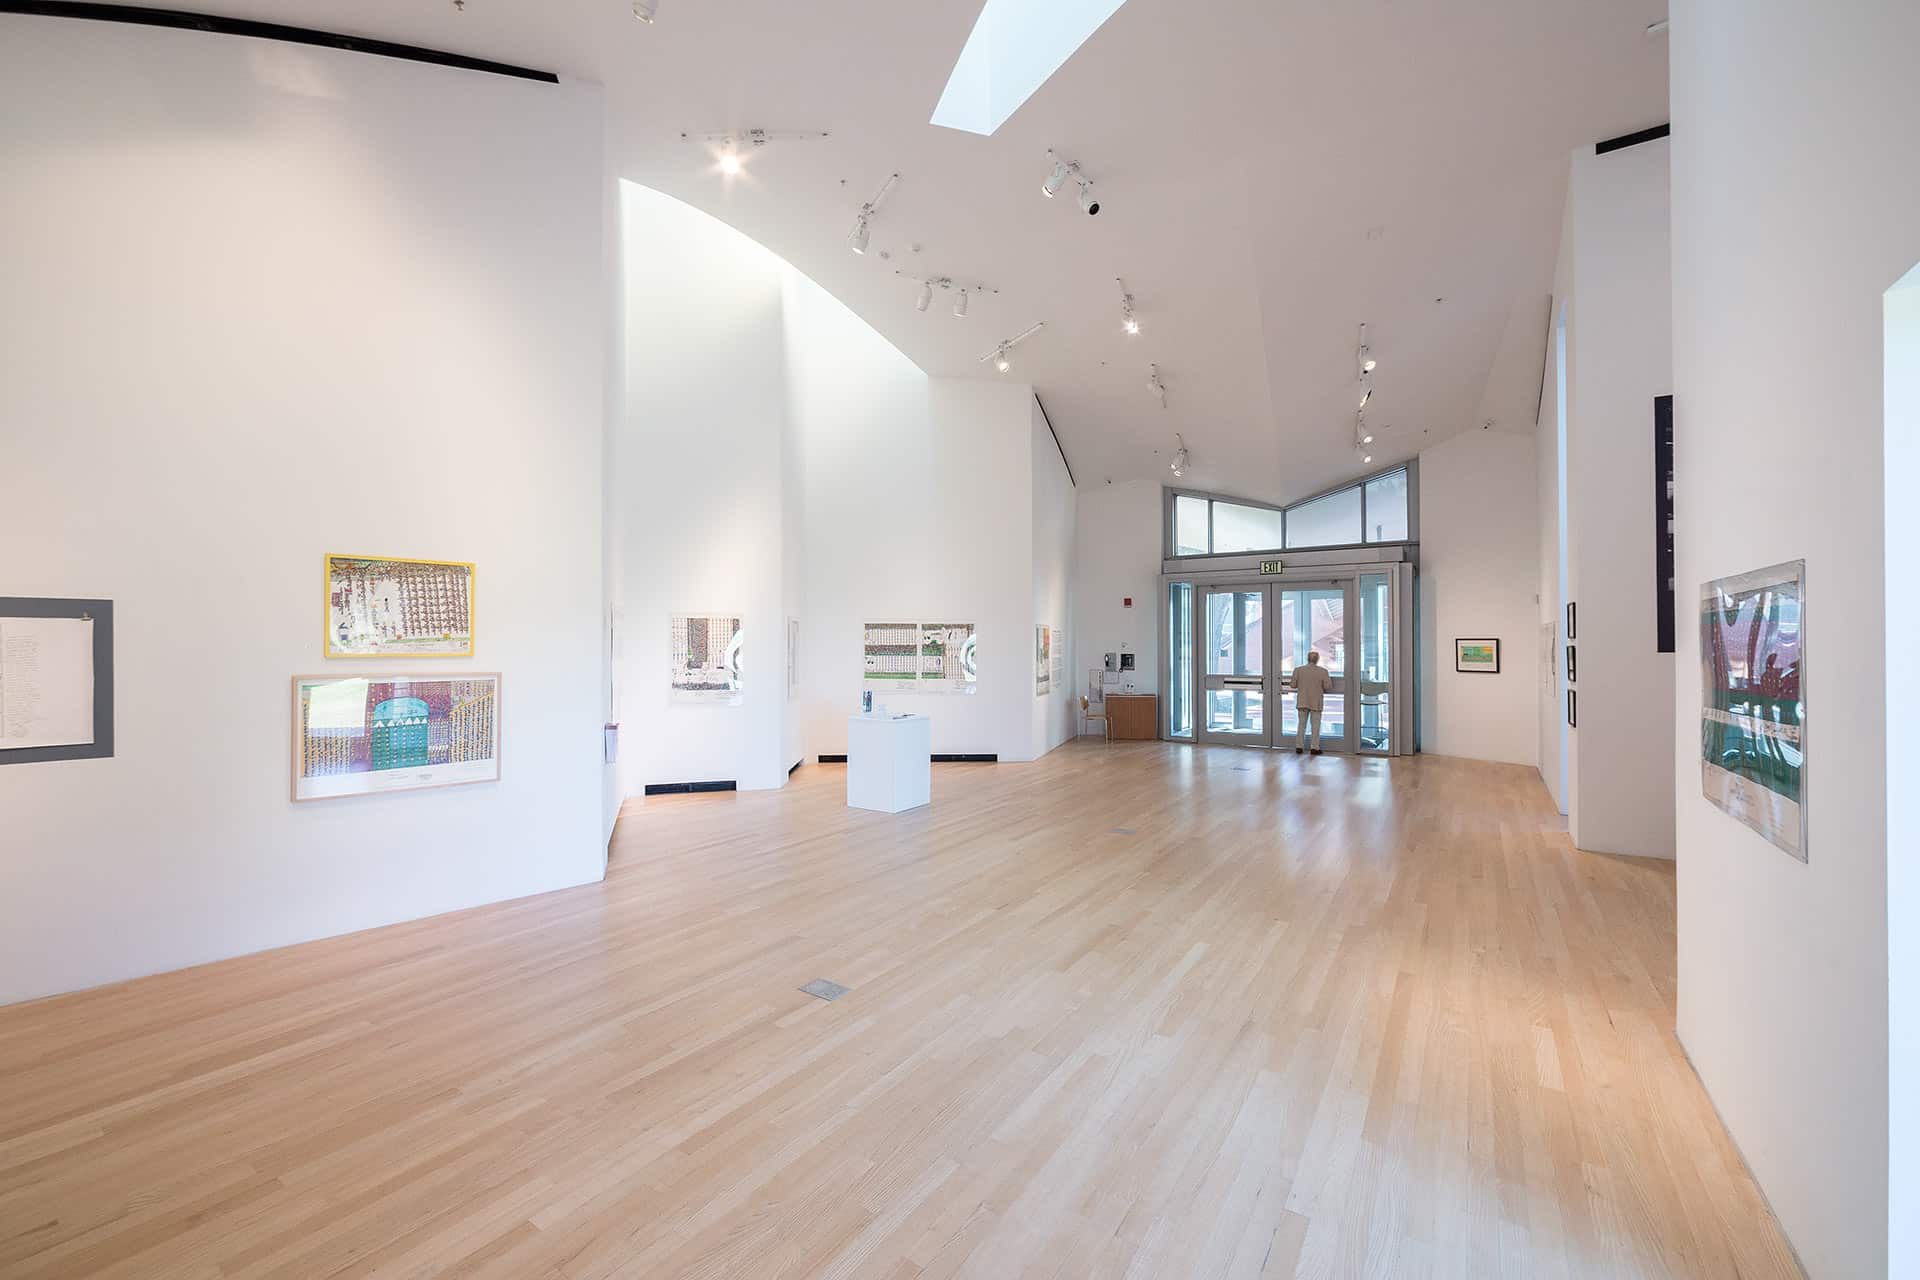 Ohr O'Keefe Museum gallery interior designed by Frank Gehry Partners with Eley Guild Hardy Architects.